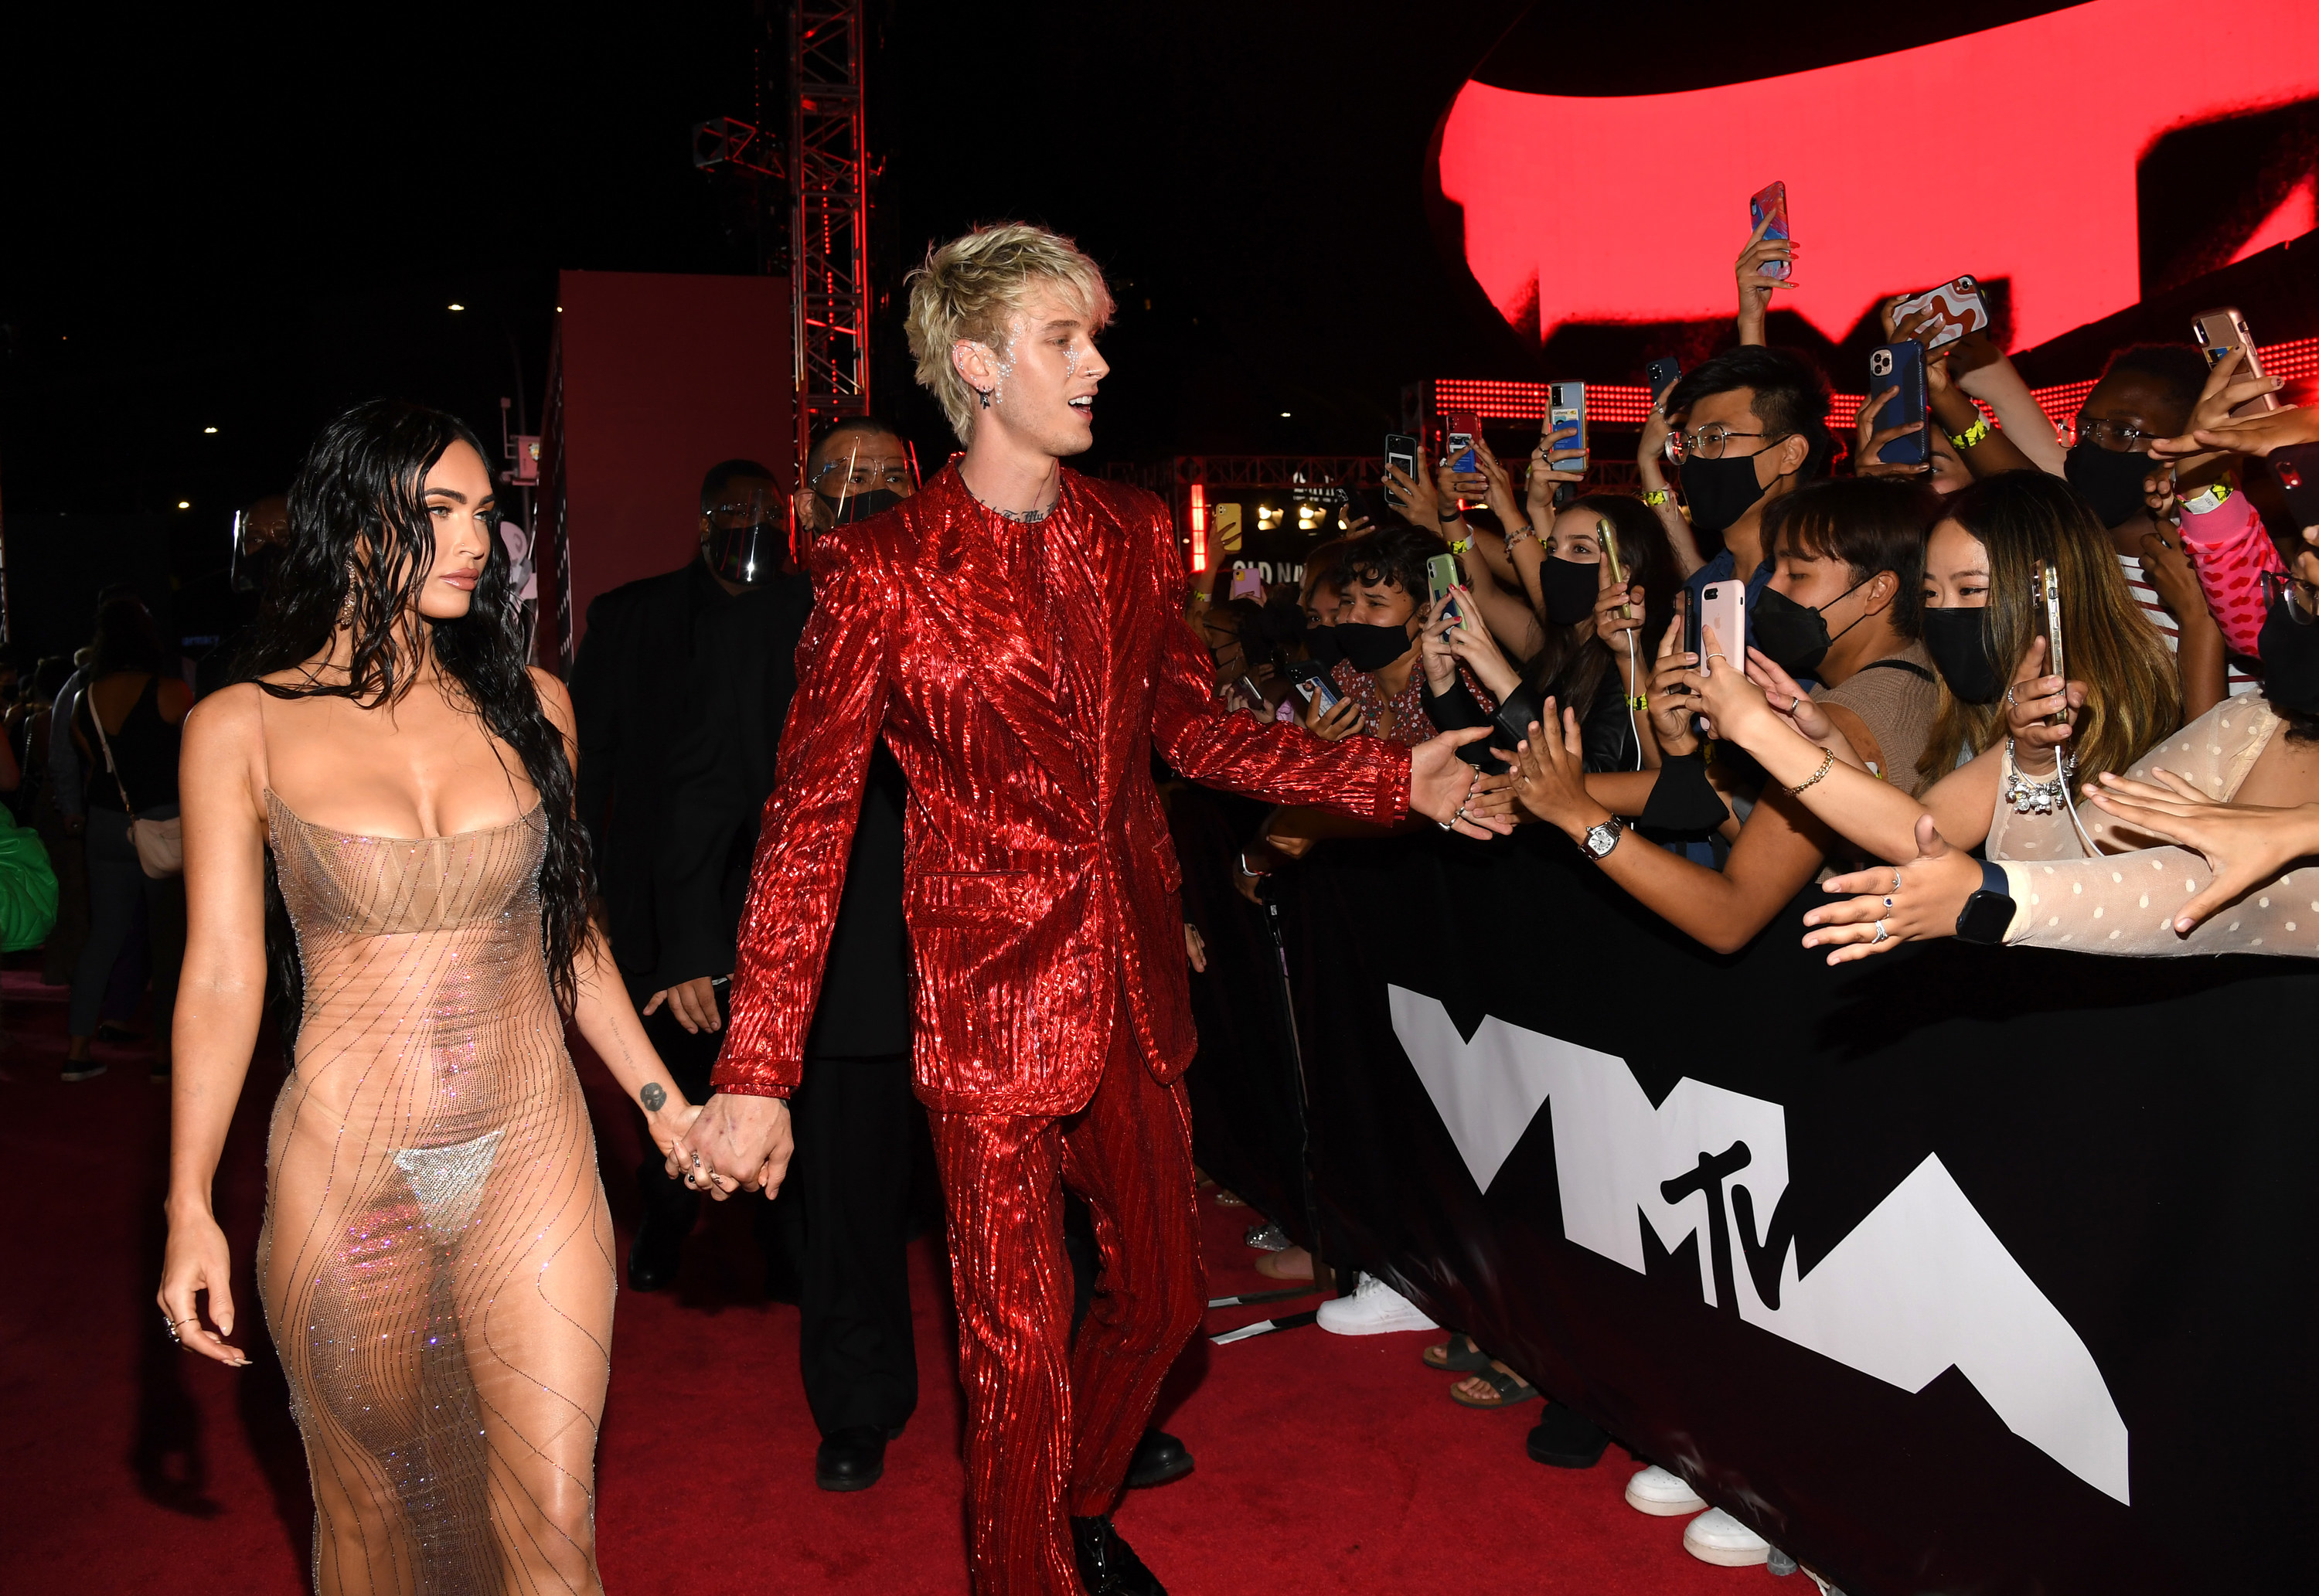 The couple walking hand-in-hand as they pass fans on the MTV VMA red carpet